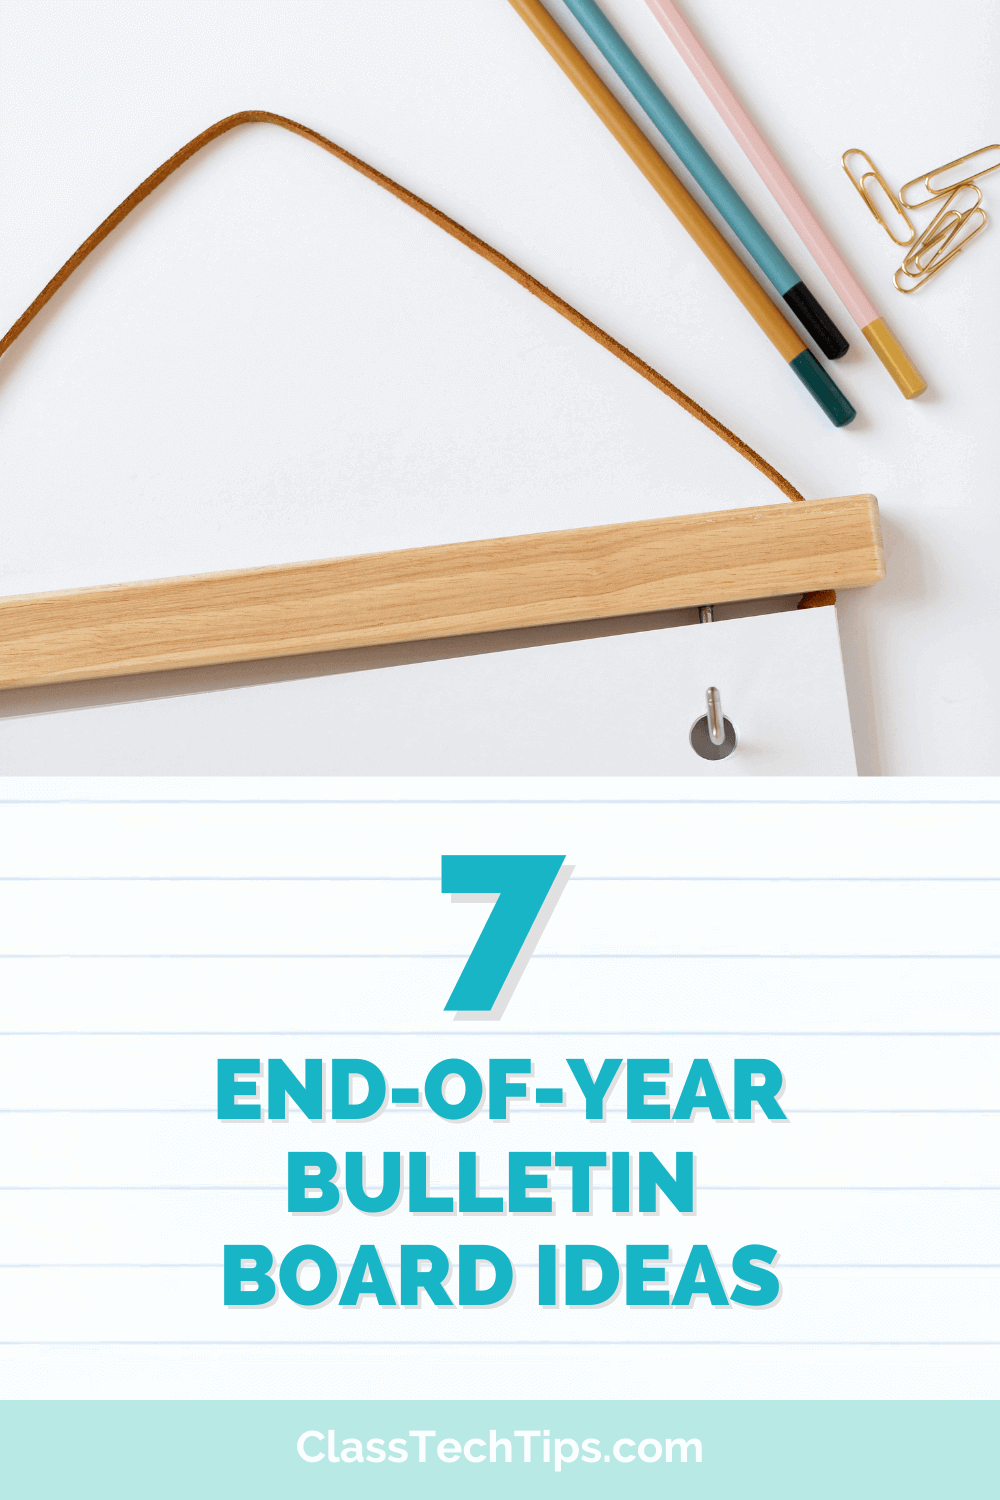 An assortment of pencils and paper clips on a desk, symbolizing the creative planning process for end-of-year bulletin board ideas.